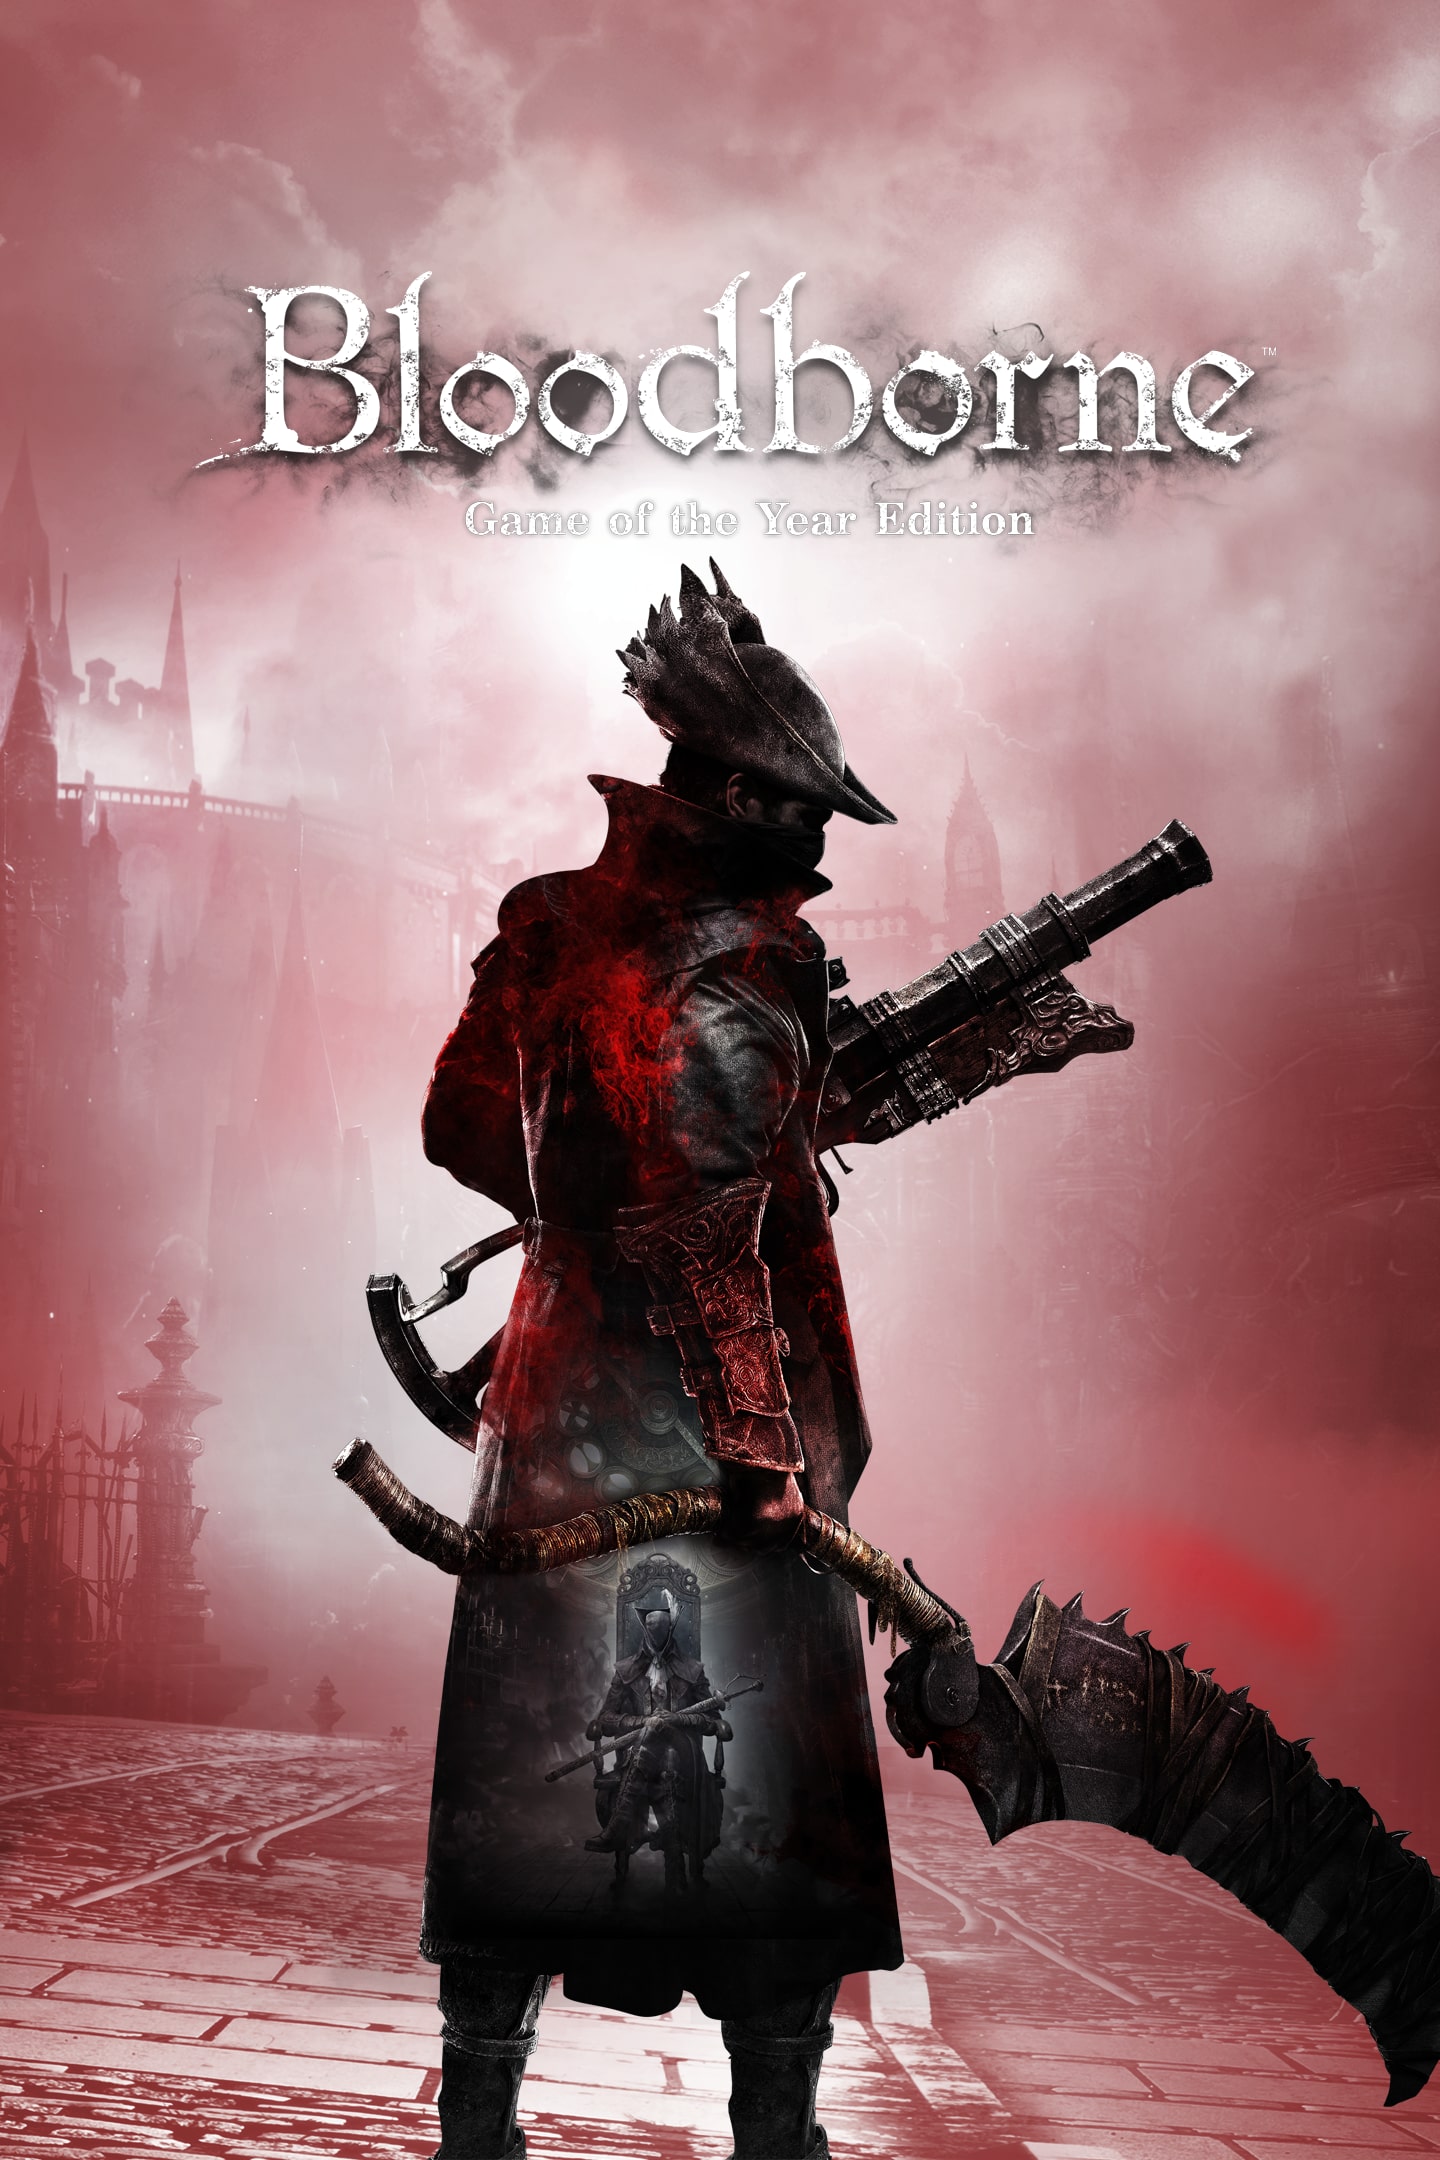 Bloodborne Game of the Year Edition Playstation 4 PS4 PS5 Bloodborne GOTY -  New!